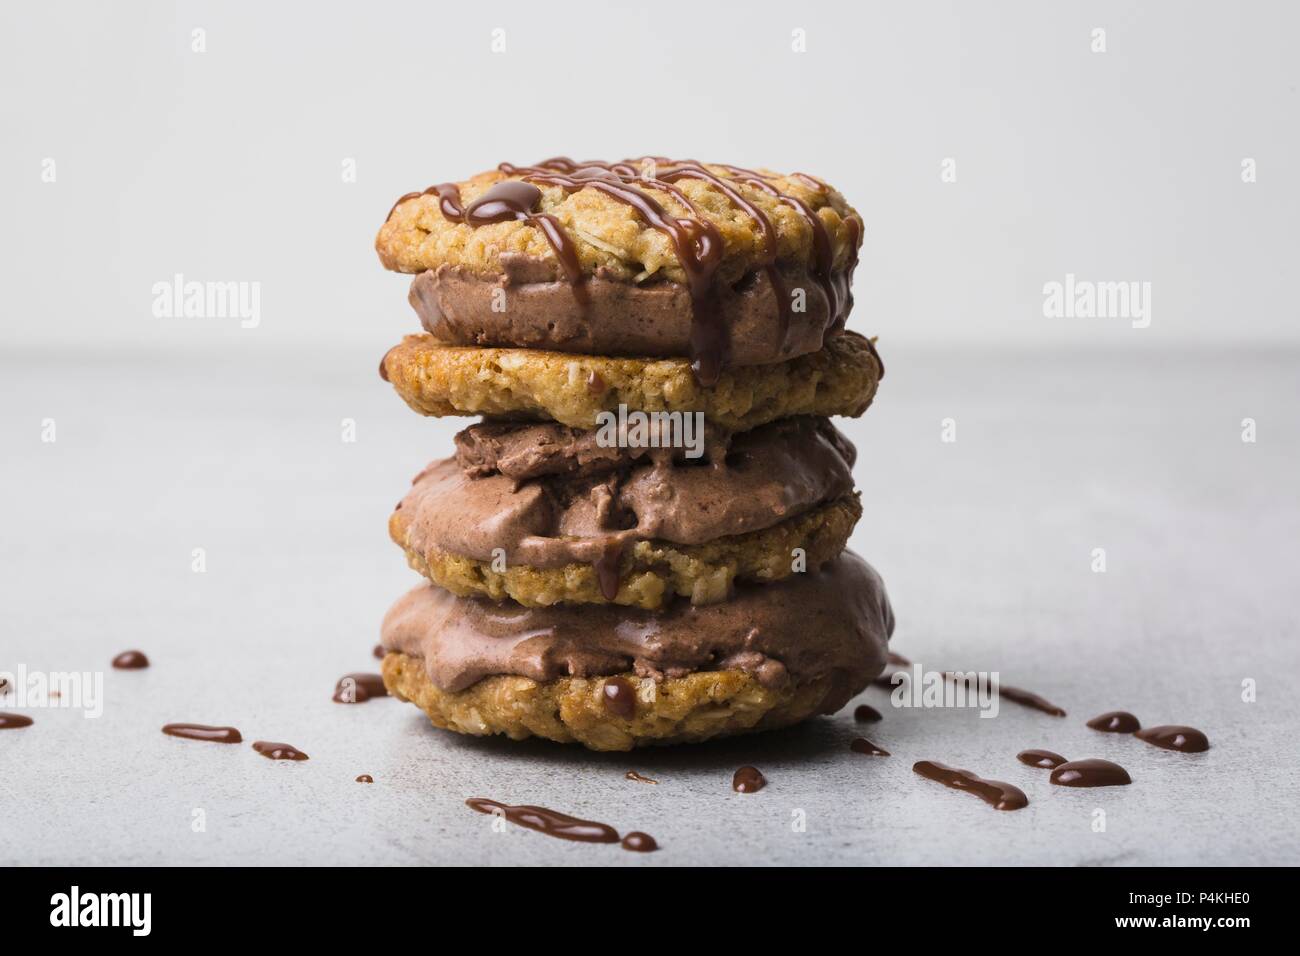 Oat cookie and chocolate ice cream sandwich Stock Photo